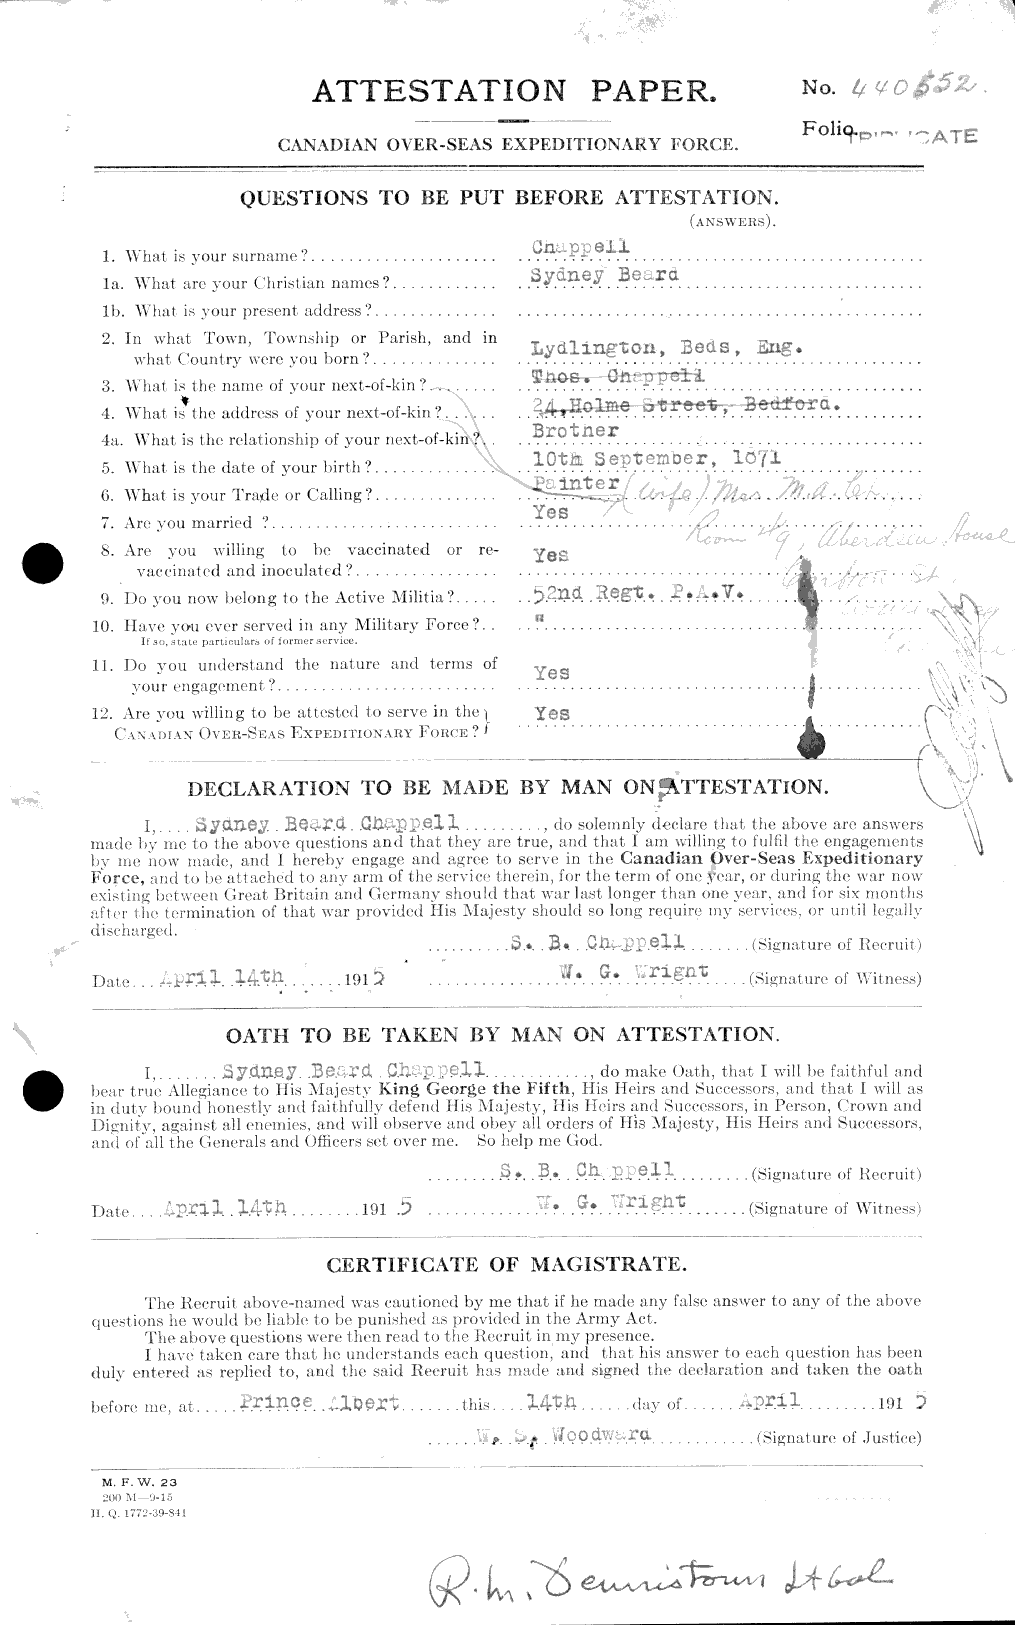 Personnel Records of the First World War - CEF 014978a